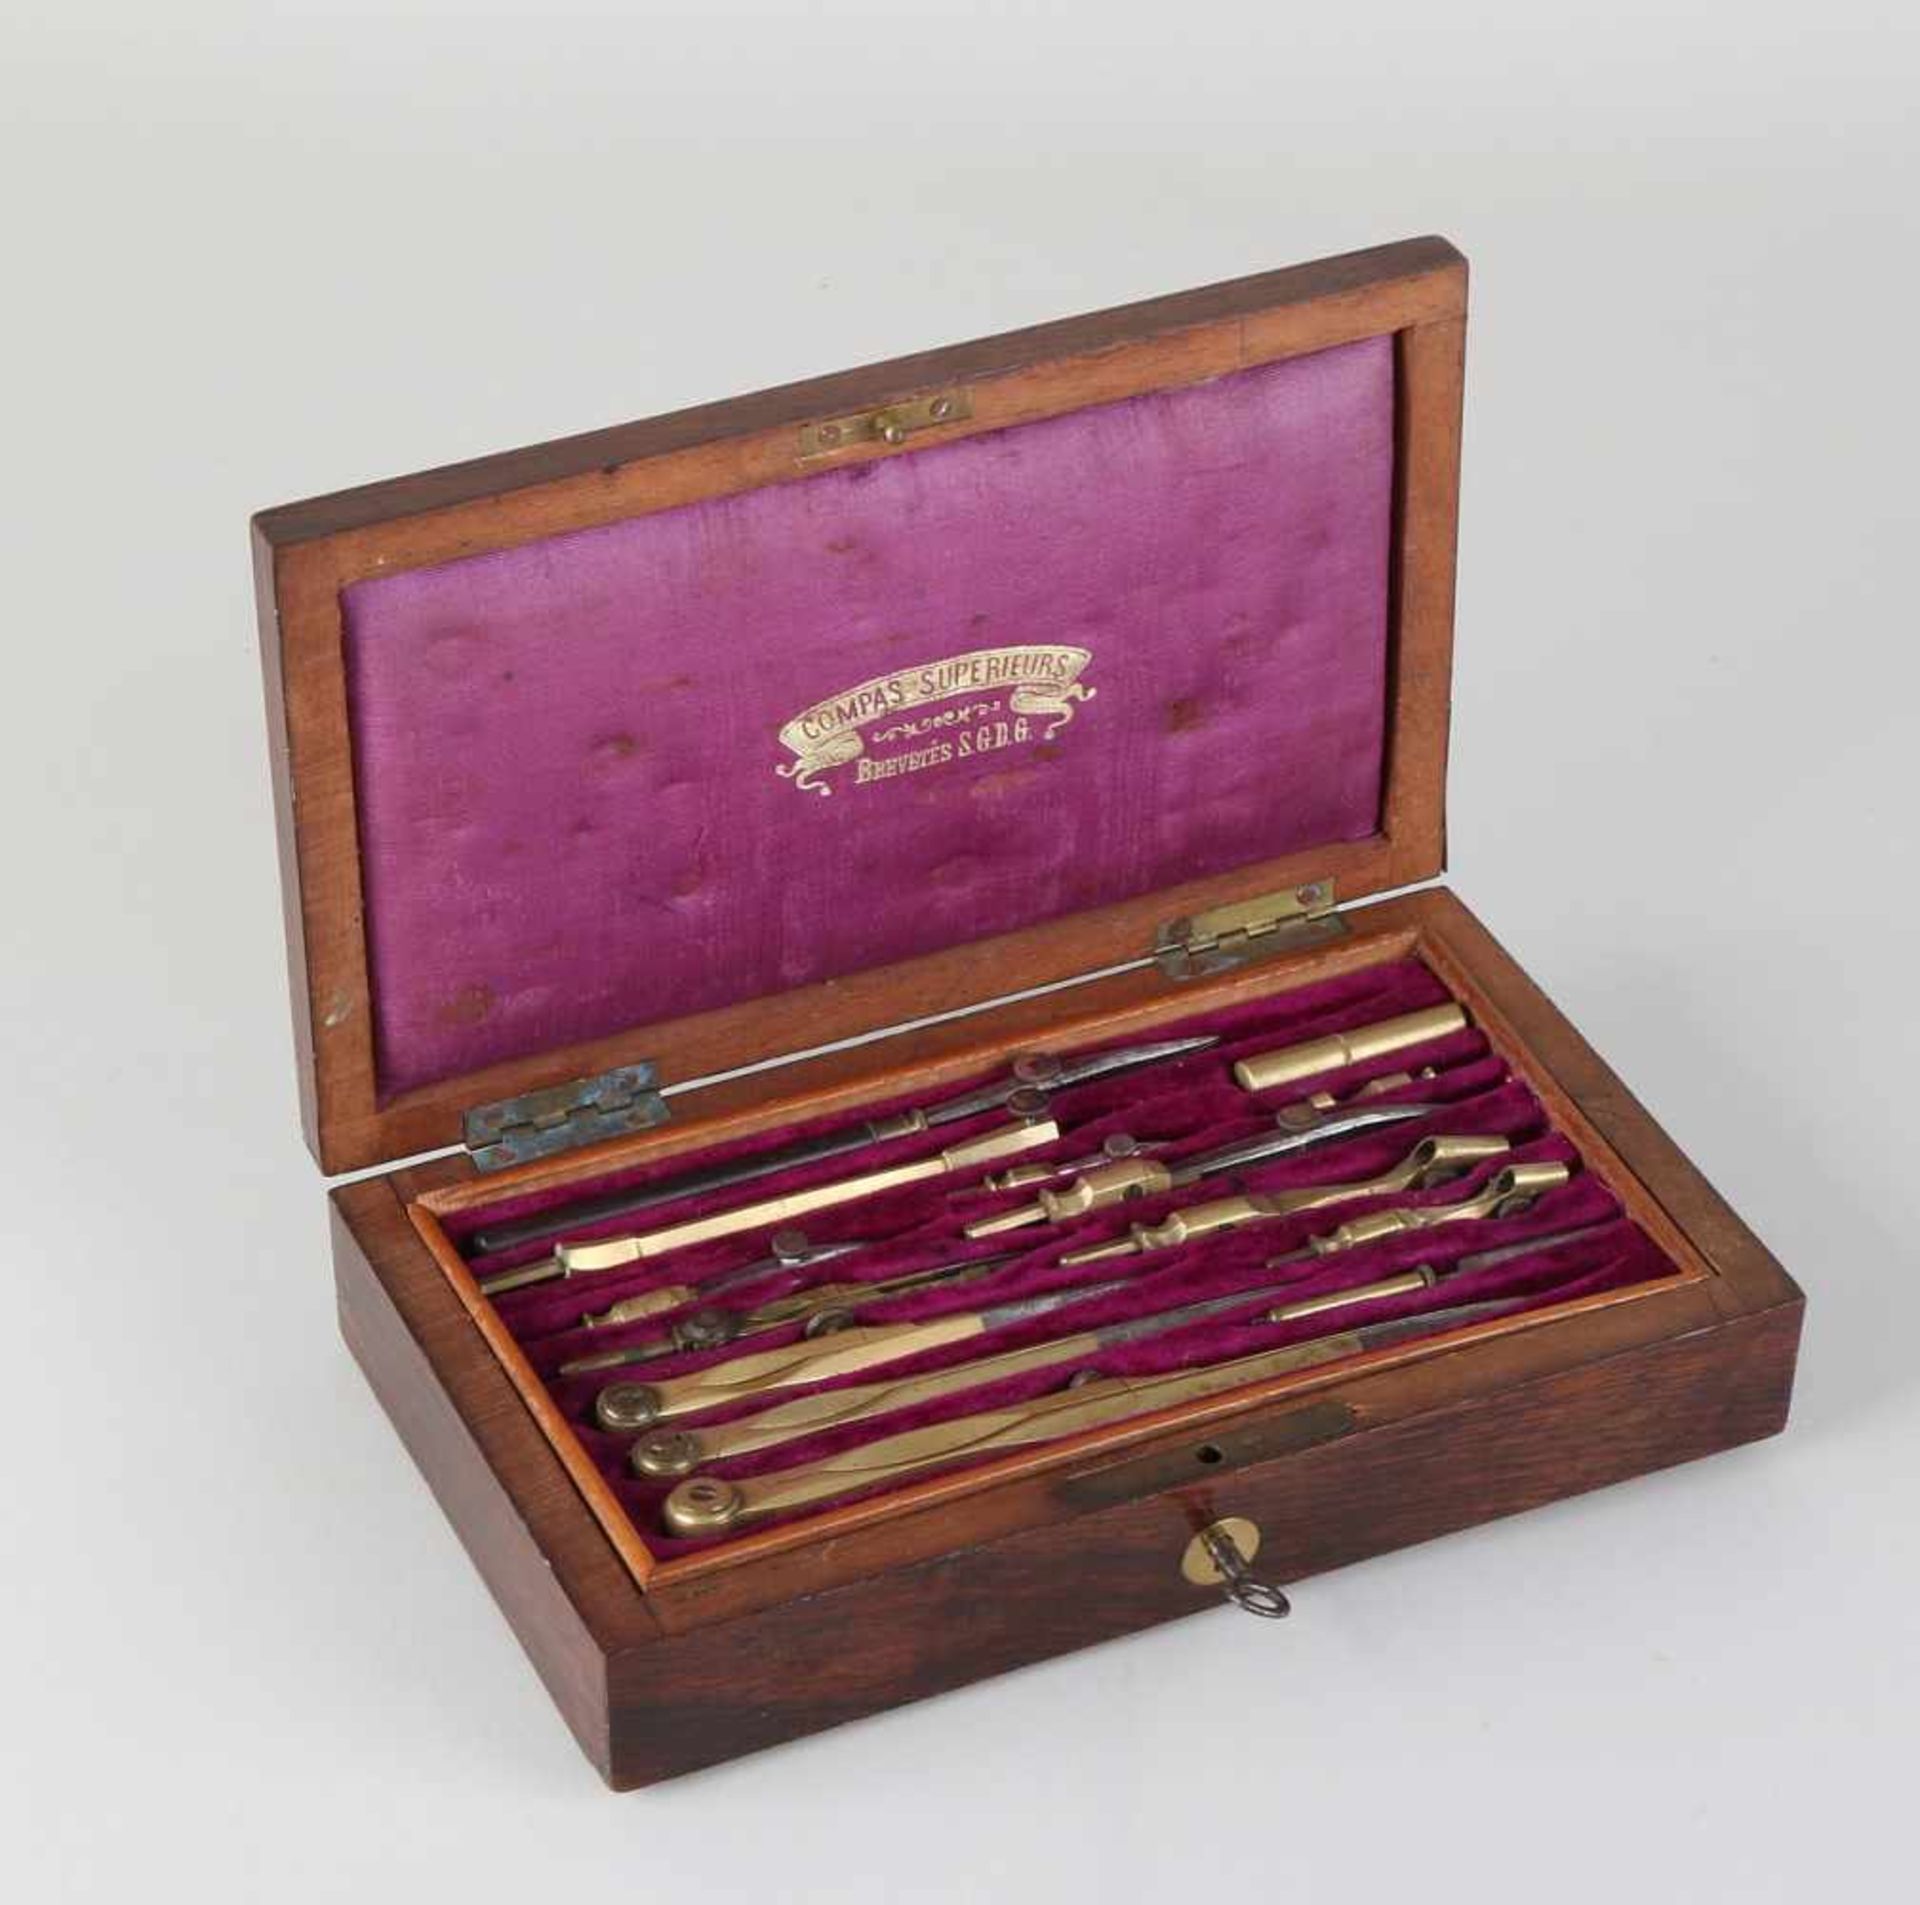 Antique French brass compass set in rosewood box. Fourteen parts. Dimensions: 21 x 12 x 4.5 cm. In